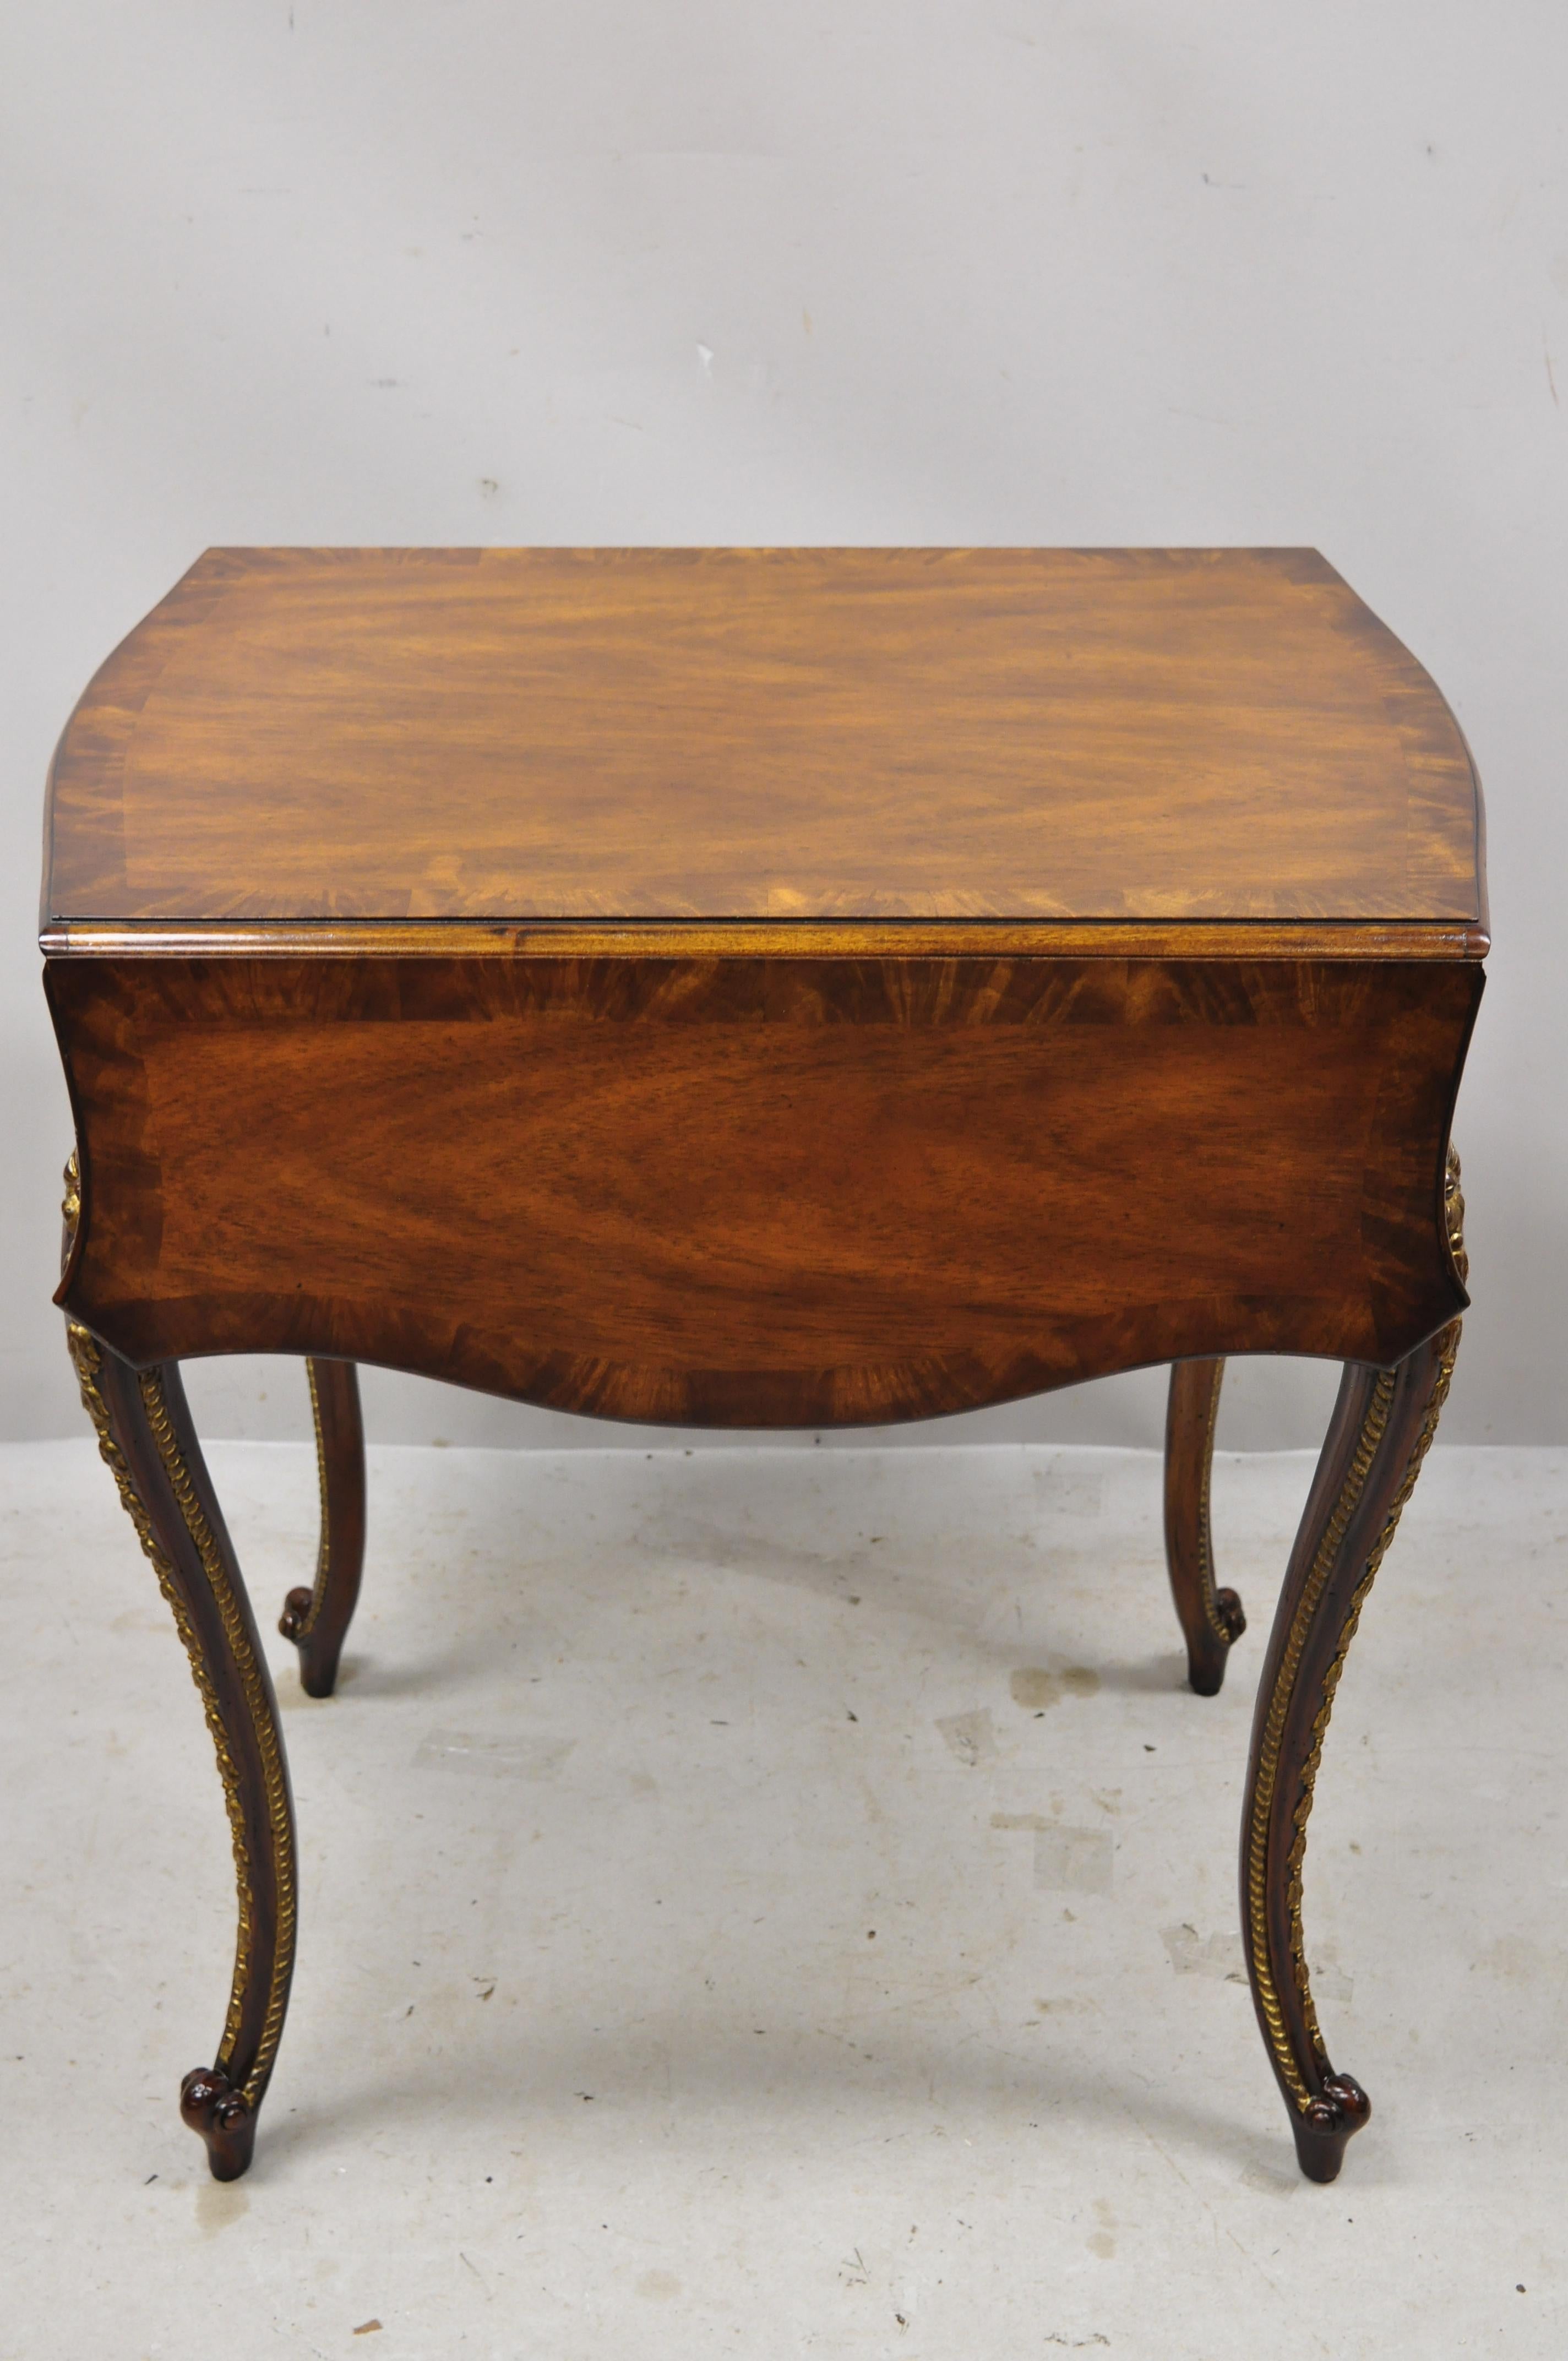 Theodore Alexander Replica English George III Pembroke Drop-Leaf Table In Good Condition For Sale In Philadelphia, PA